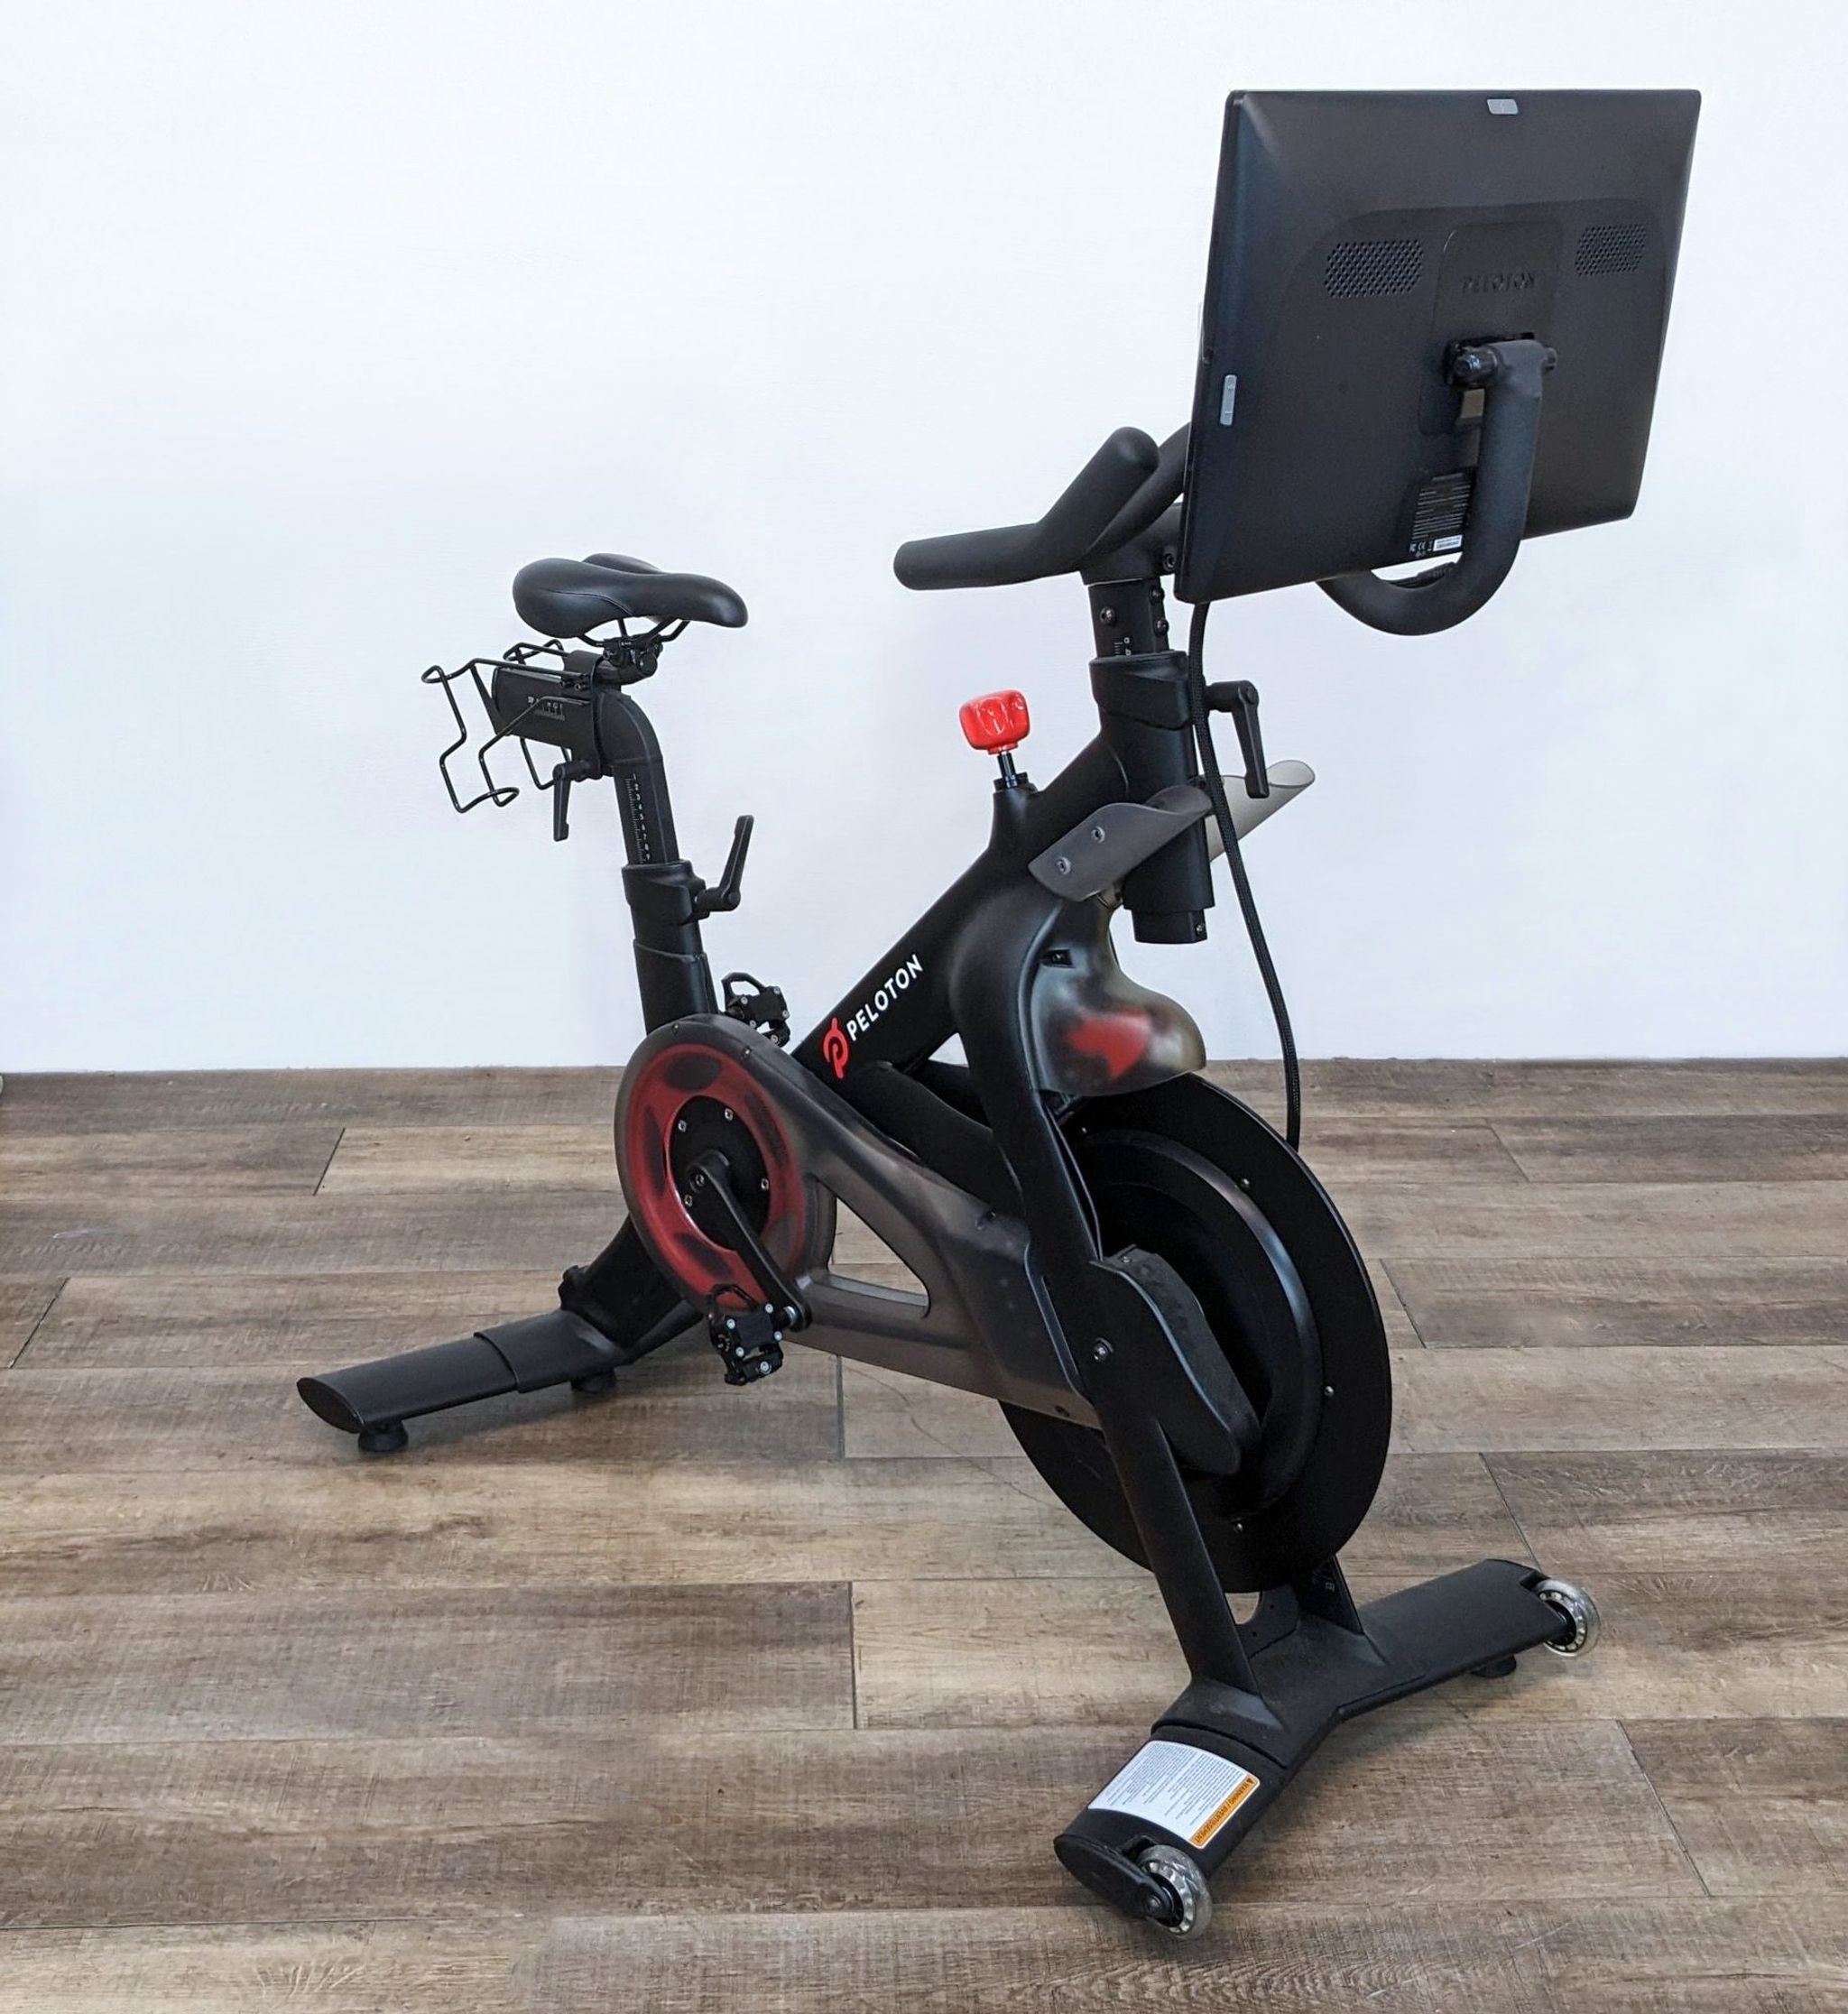 Side angle of a Peloton indoor cycling bike featuring branding, adjustable seat, handlebars, and a digital display monitor.